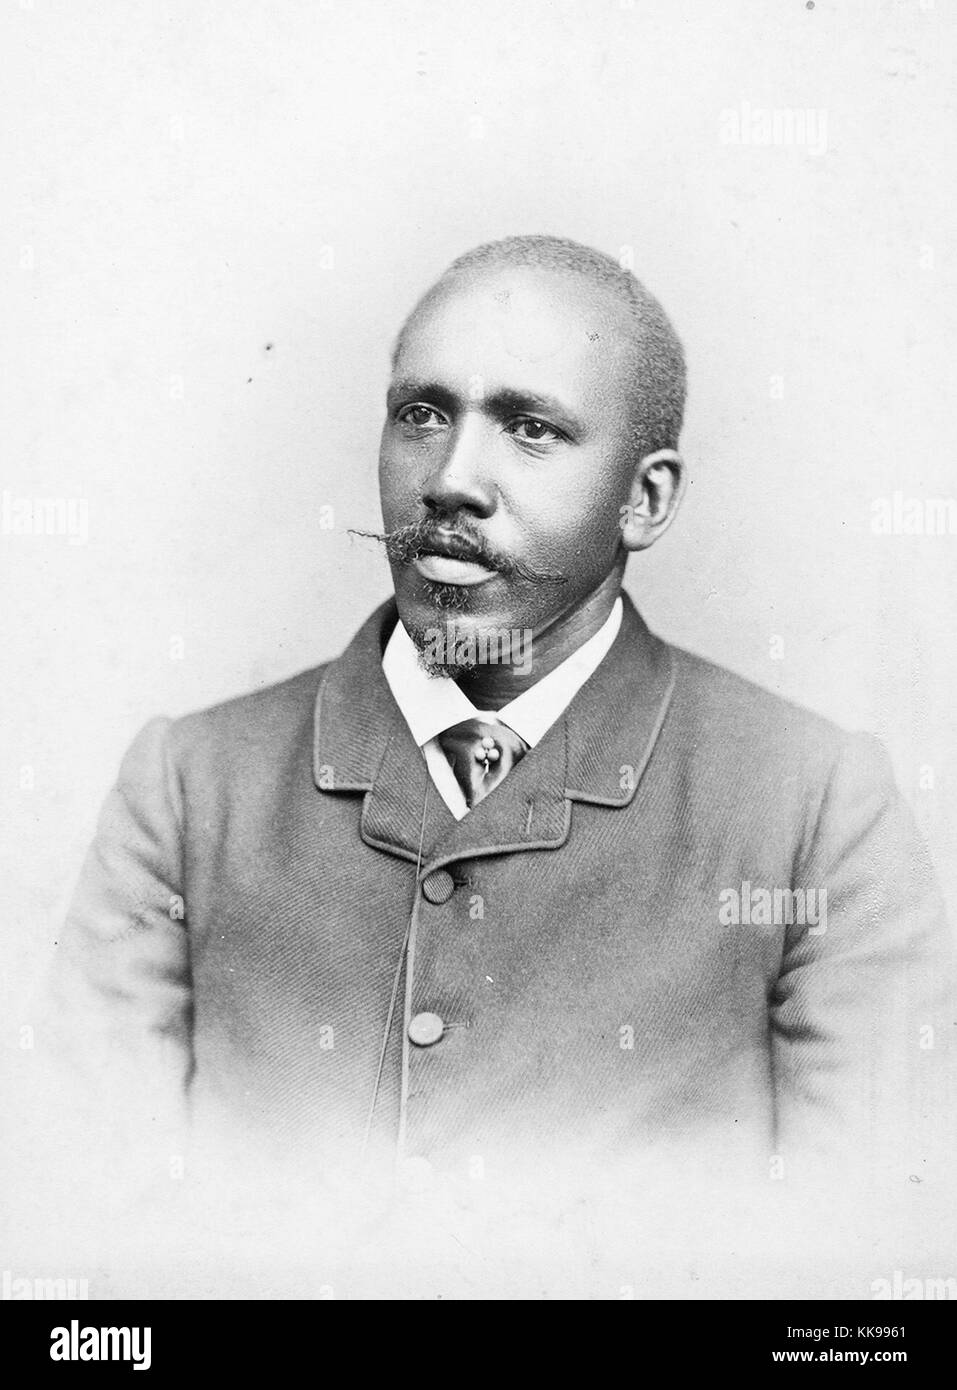 A photographic portrait of John Henry Smyth, he was an American lawyer and diplomat, he held a number of political positions including servicing as the Ambassador to Liberia from the United States, he was the first African-American to attend the Academy of Fine Arts in Philadelphia, he founded the Virginia Manual Labor School as a way to help African American youths convicted of petty crimes learn a trade in order to build better lives, 1900. From the New York Public Library. Stock Photo